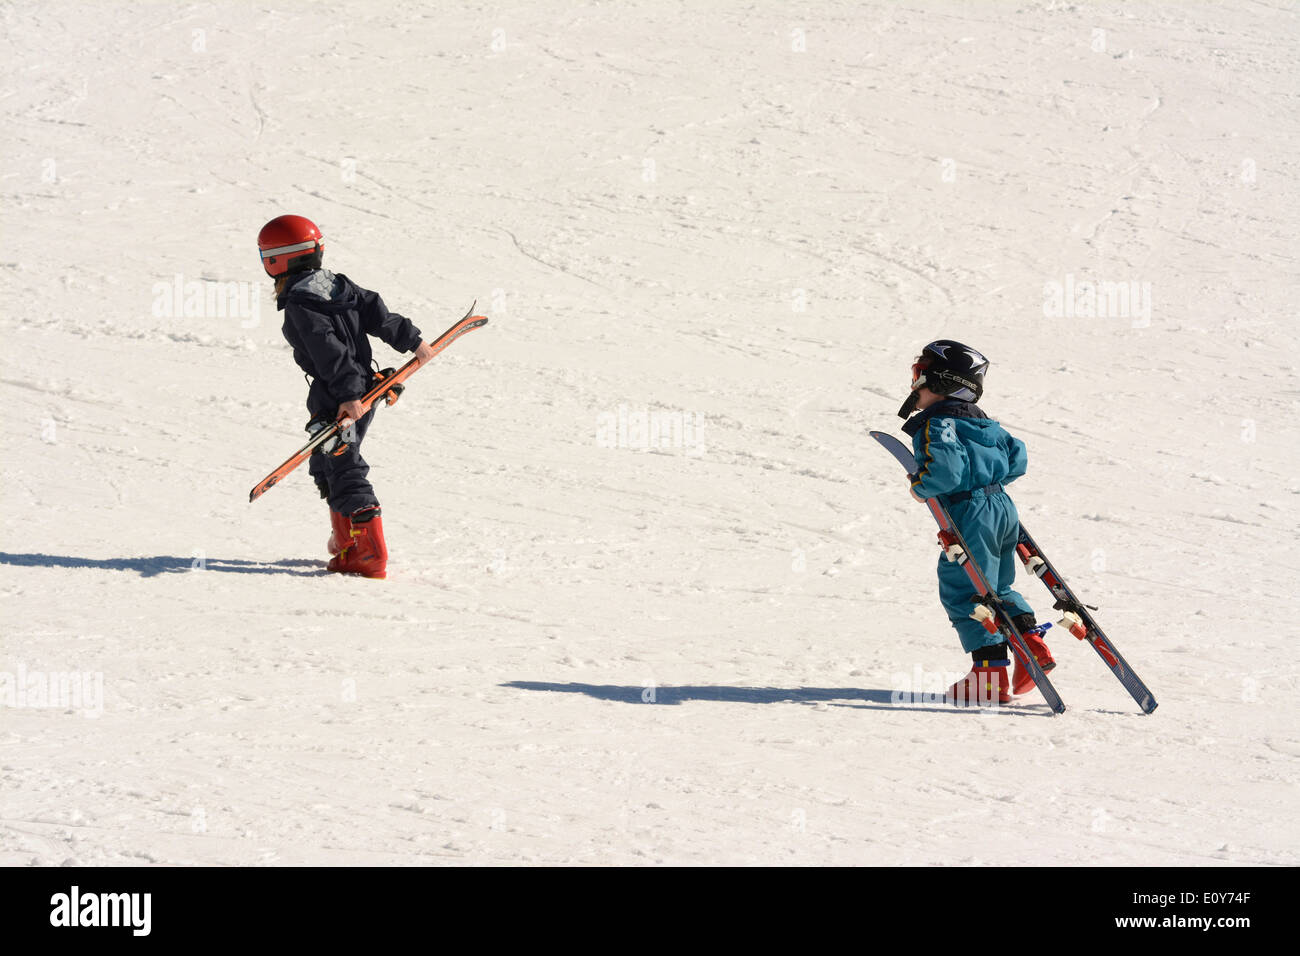 Young skiers at a ski resort Stock Photo